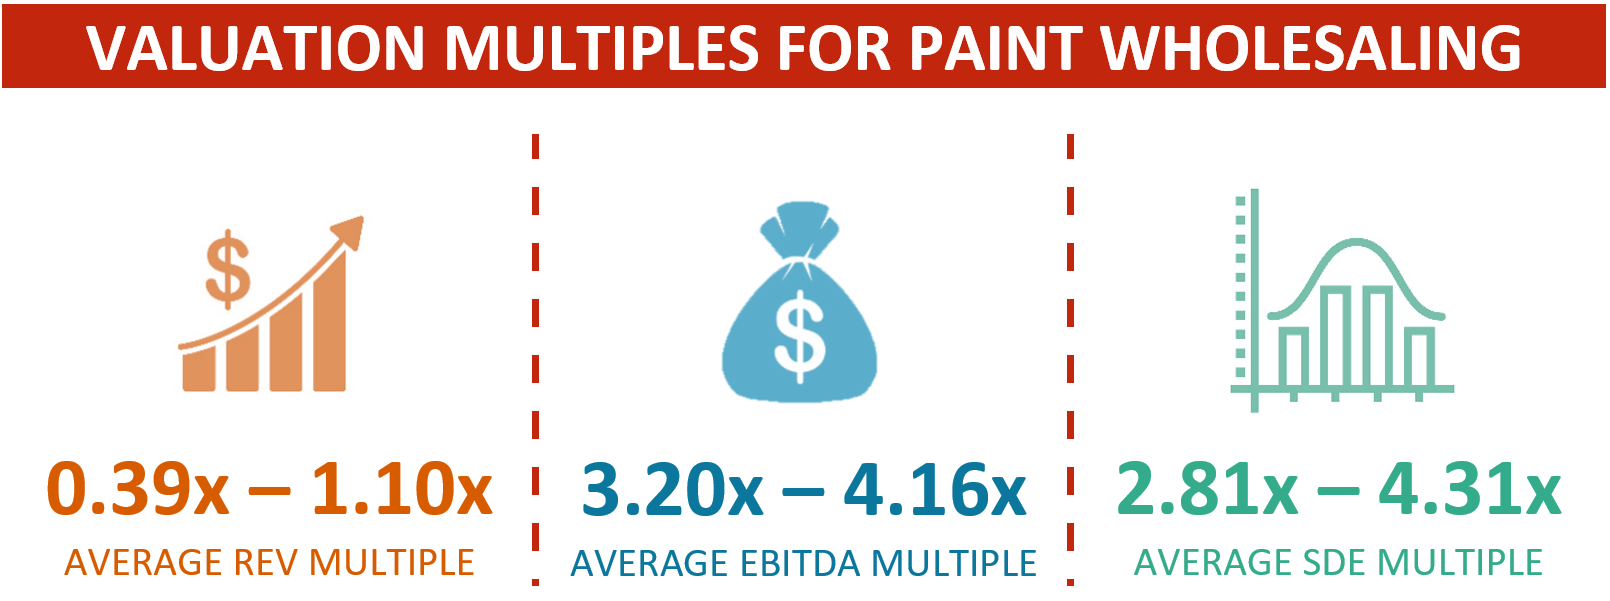 Valuation Multiples For Paint Wholesaling